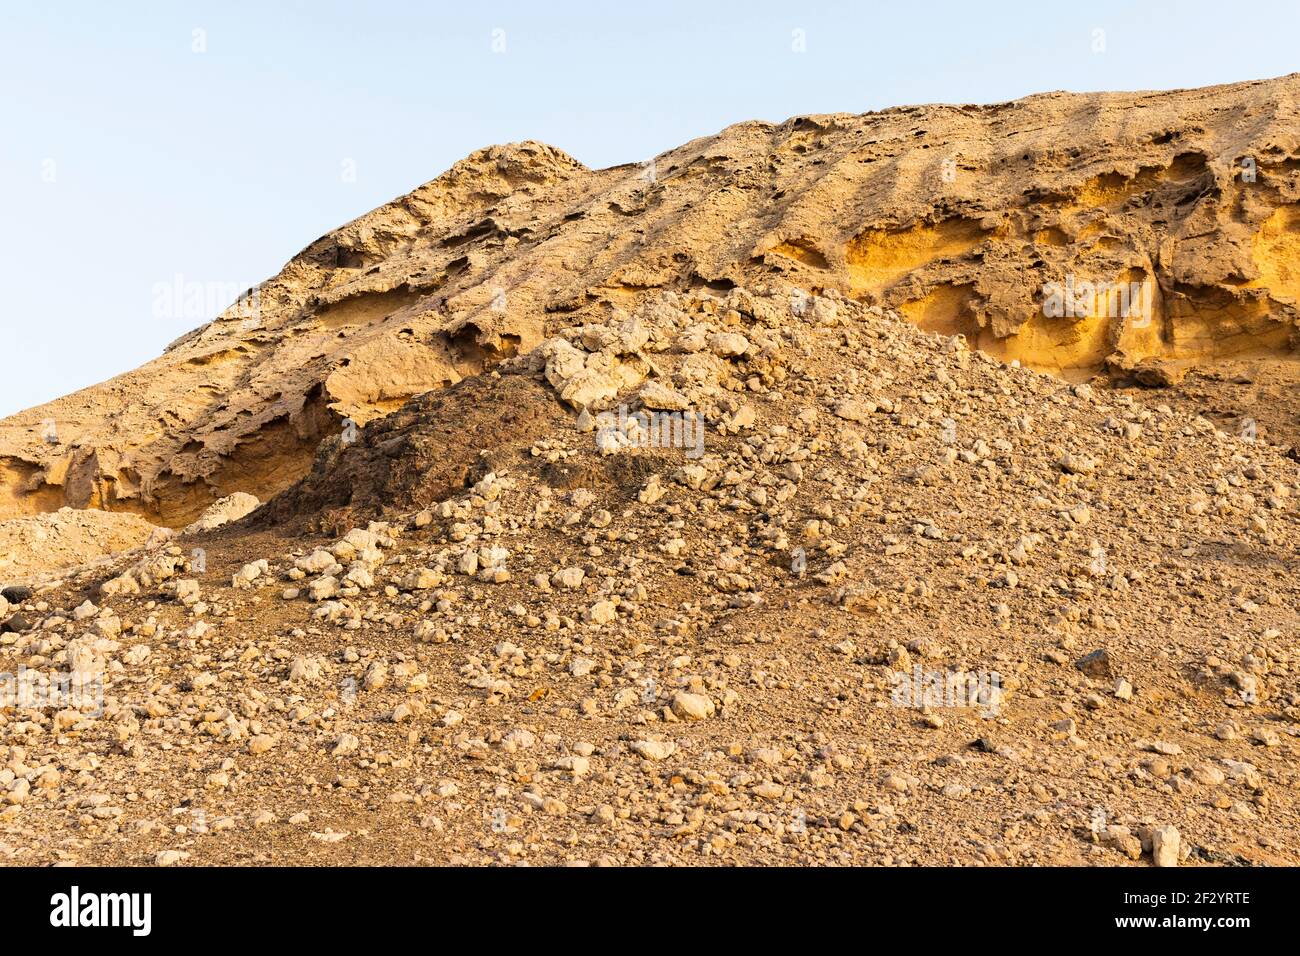 93 million years old rocks formations known as Jebels in Buhais area of Sharjah emirate, Stock Photo